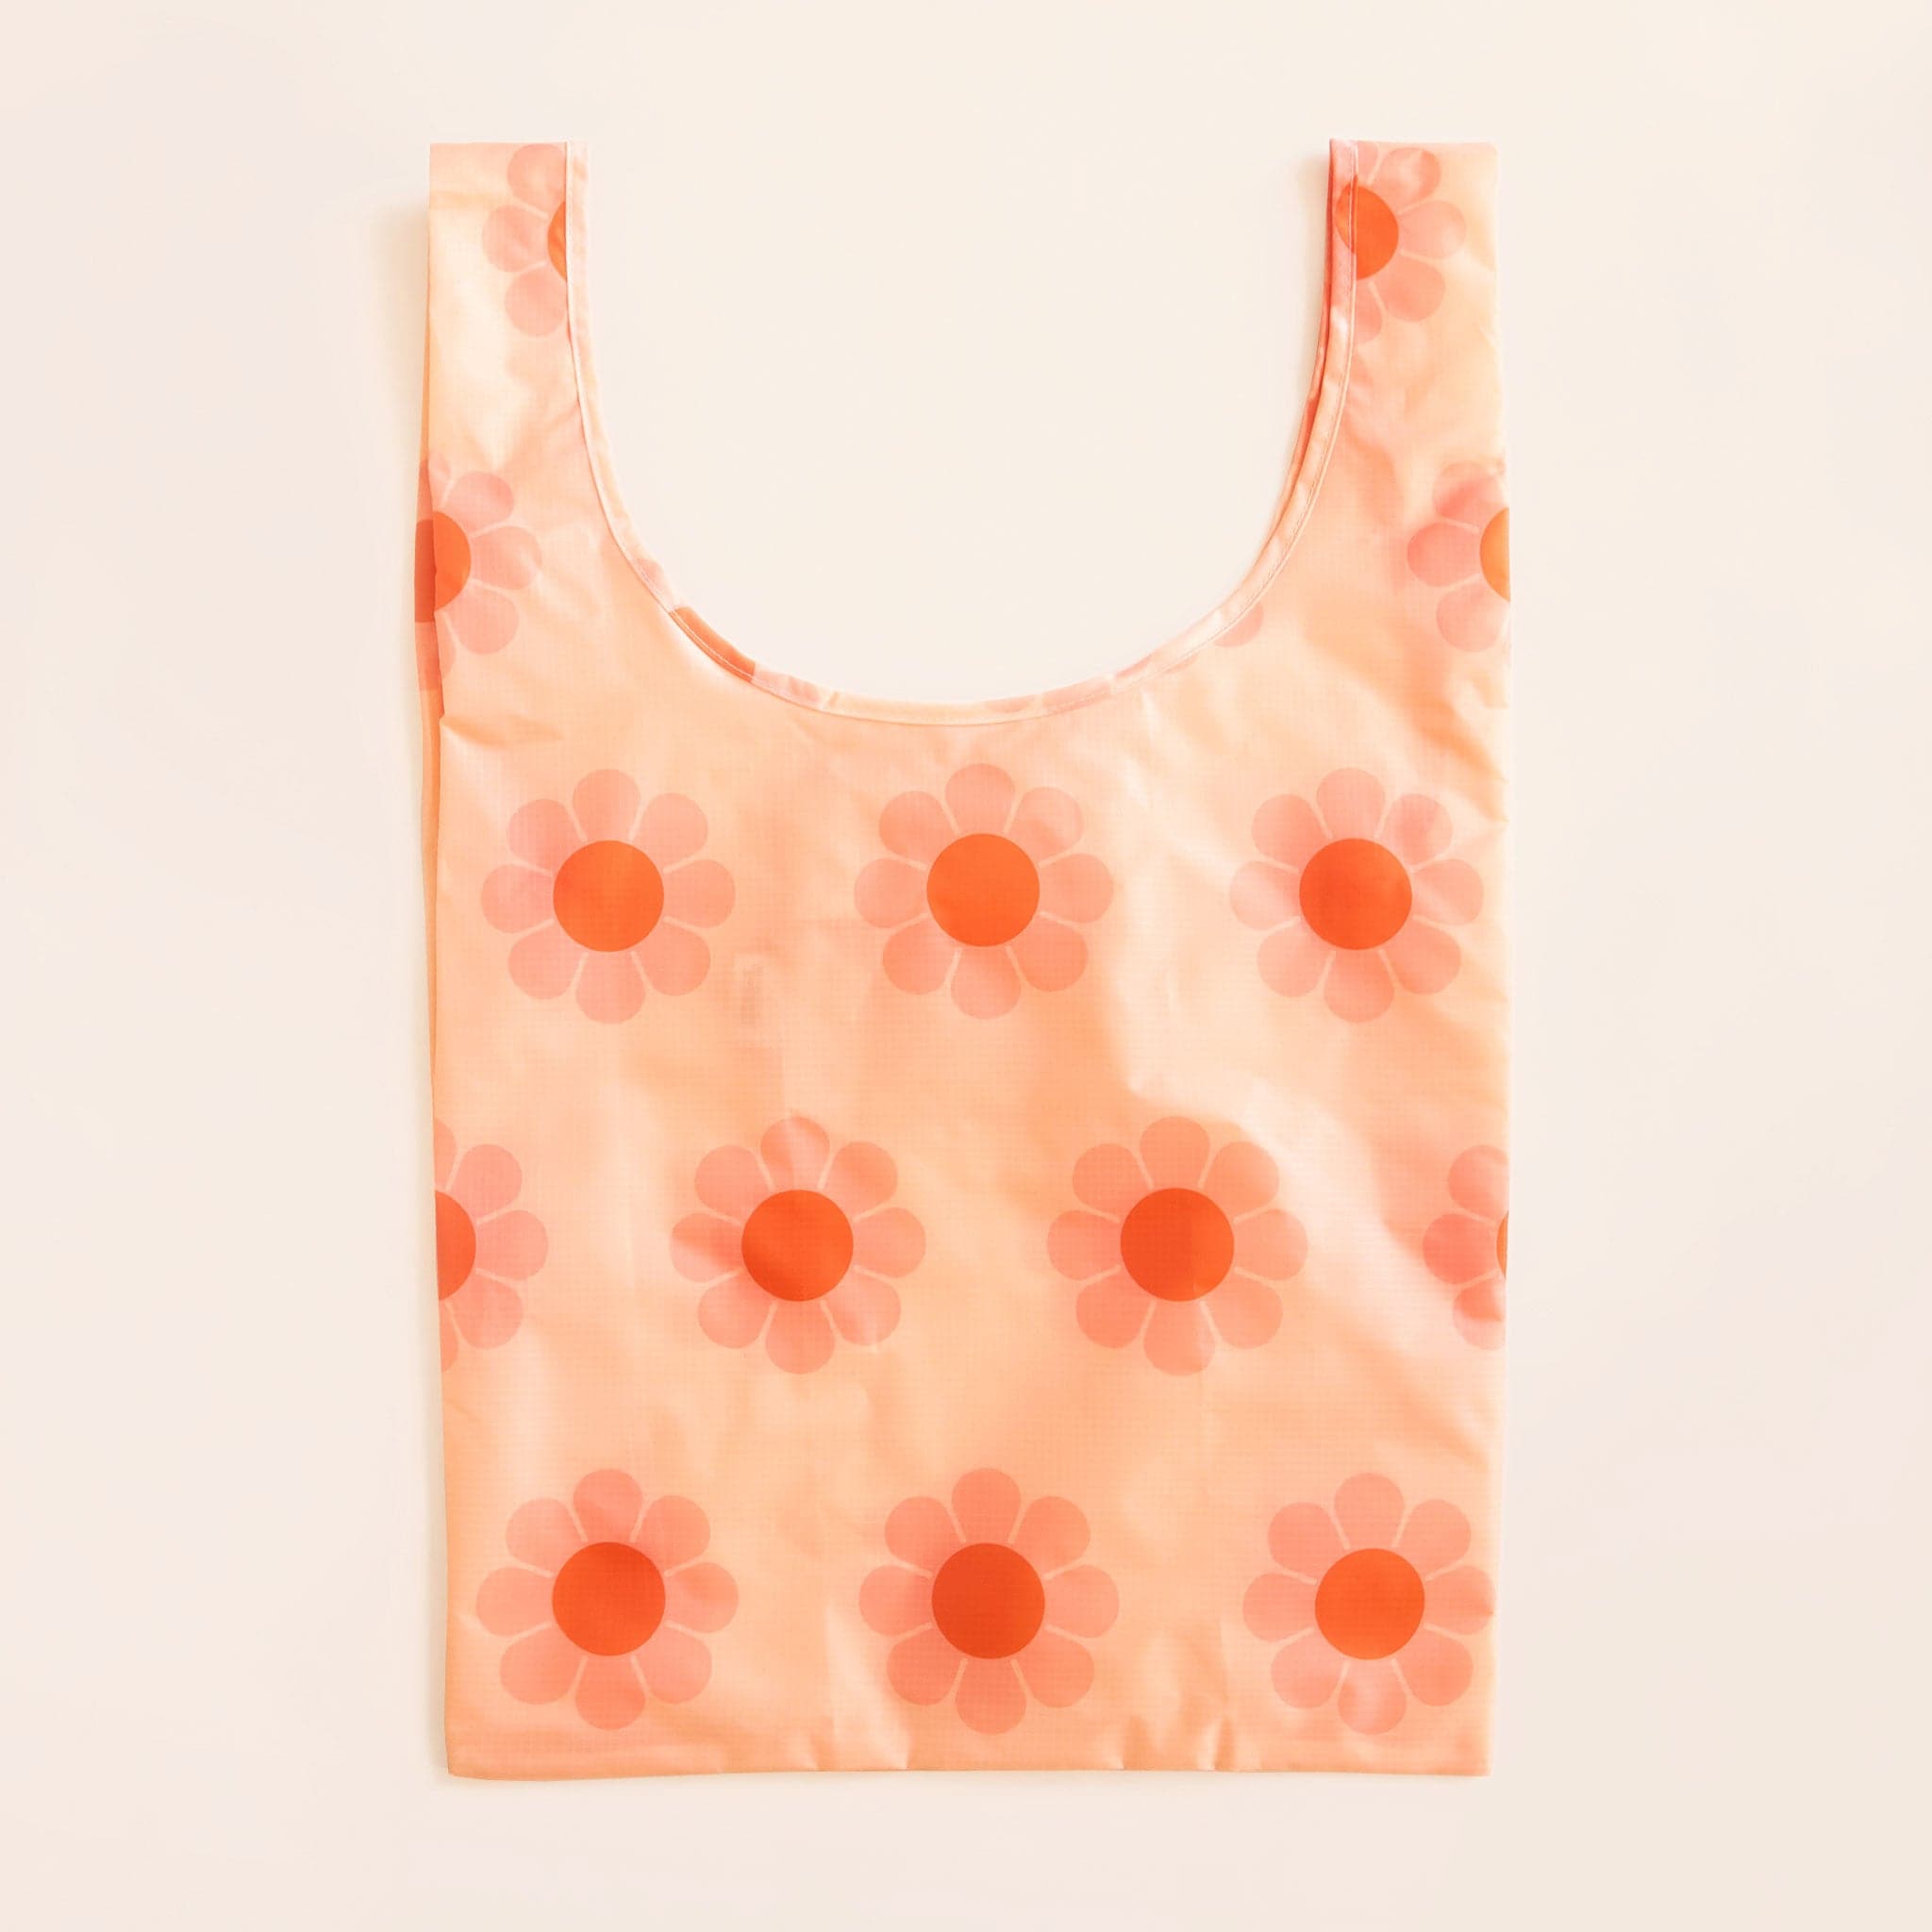 Peach reusable bag filled with a pattern of flowers with pink petals and red-orange centers. The bag is positioned flat on a table and has a 'U' shape between two handles.